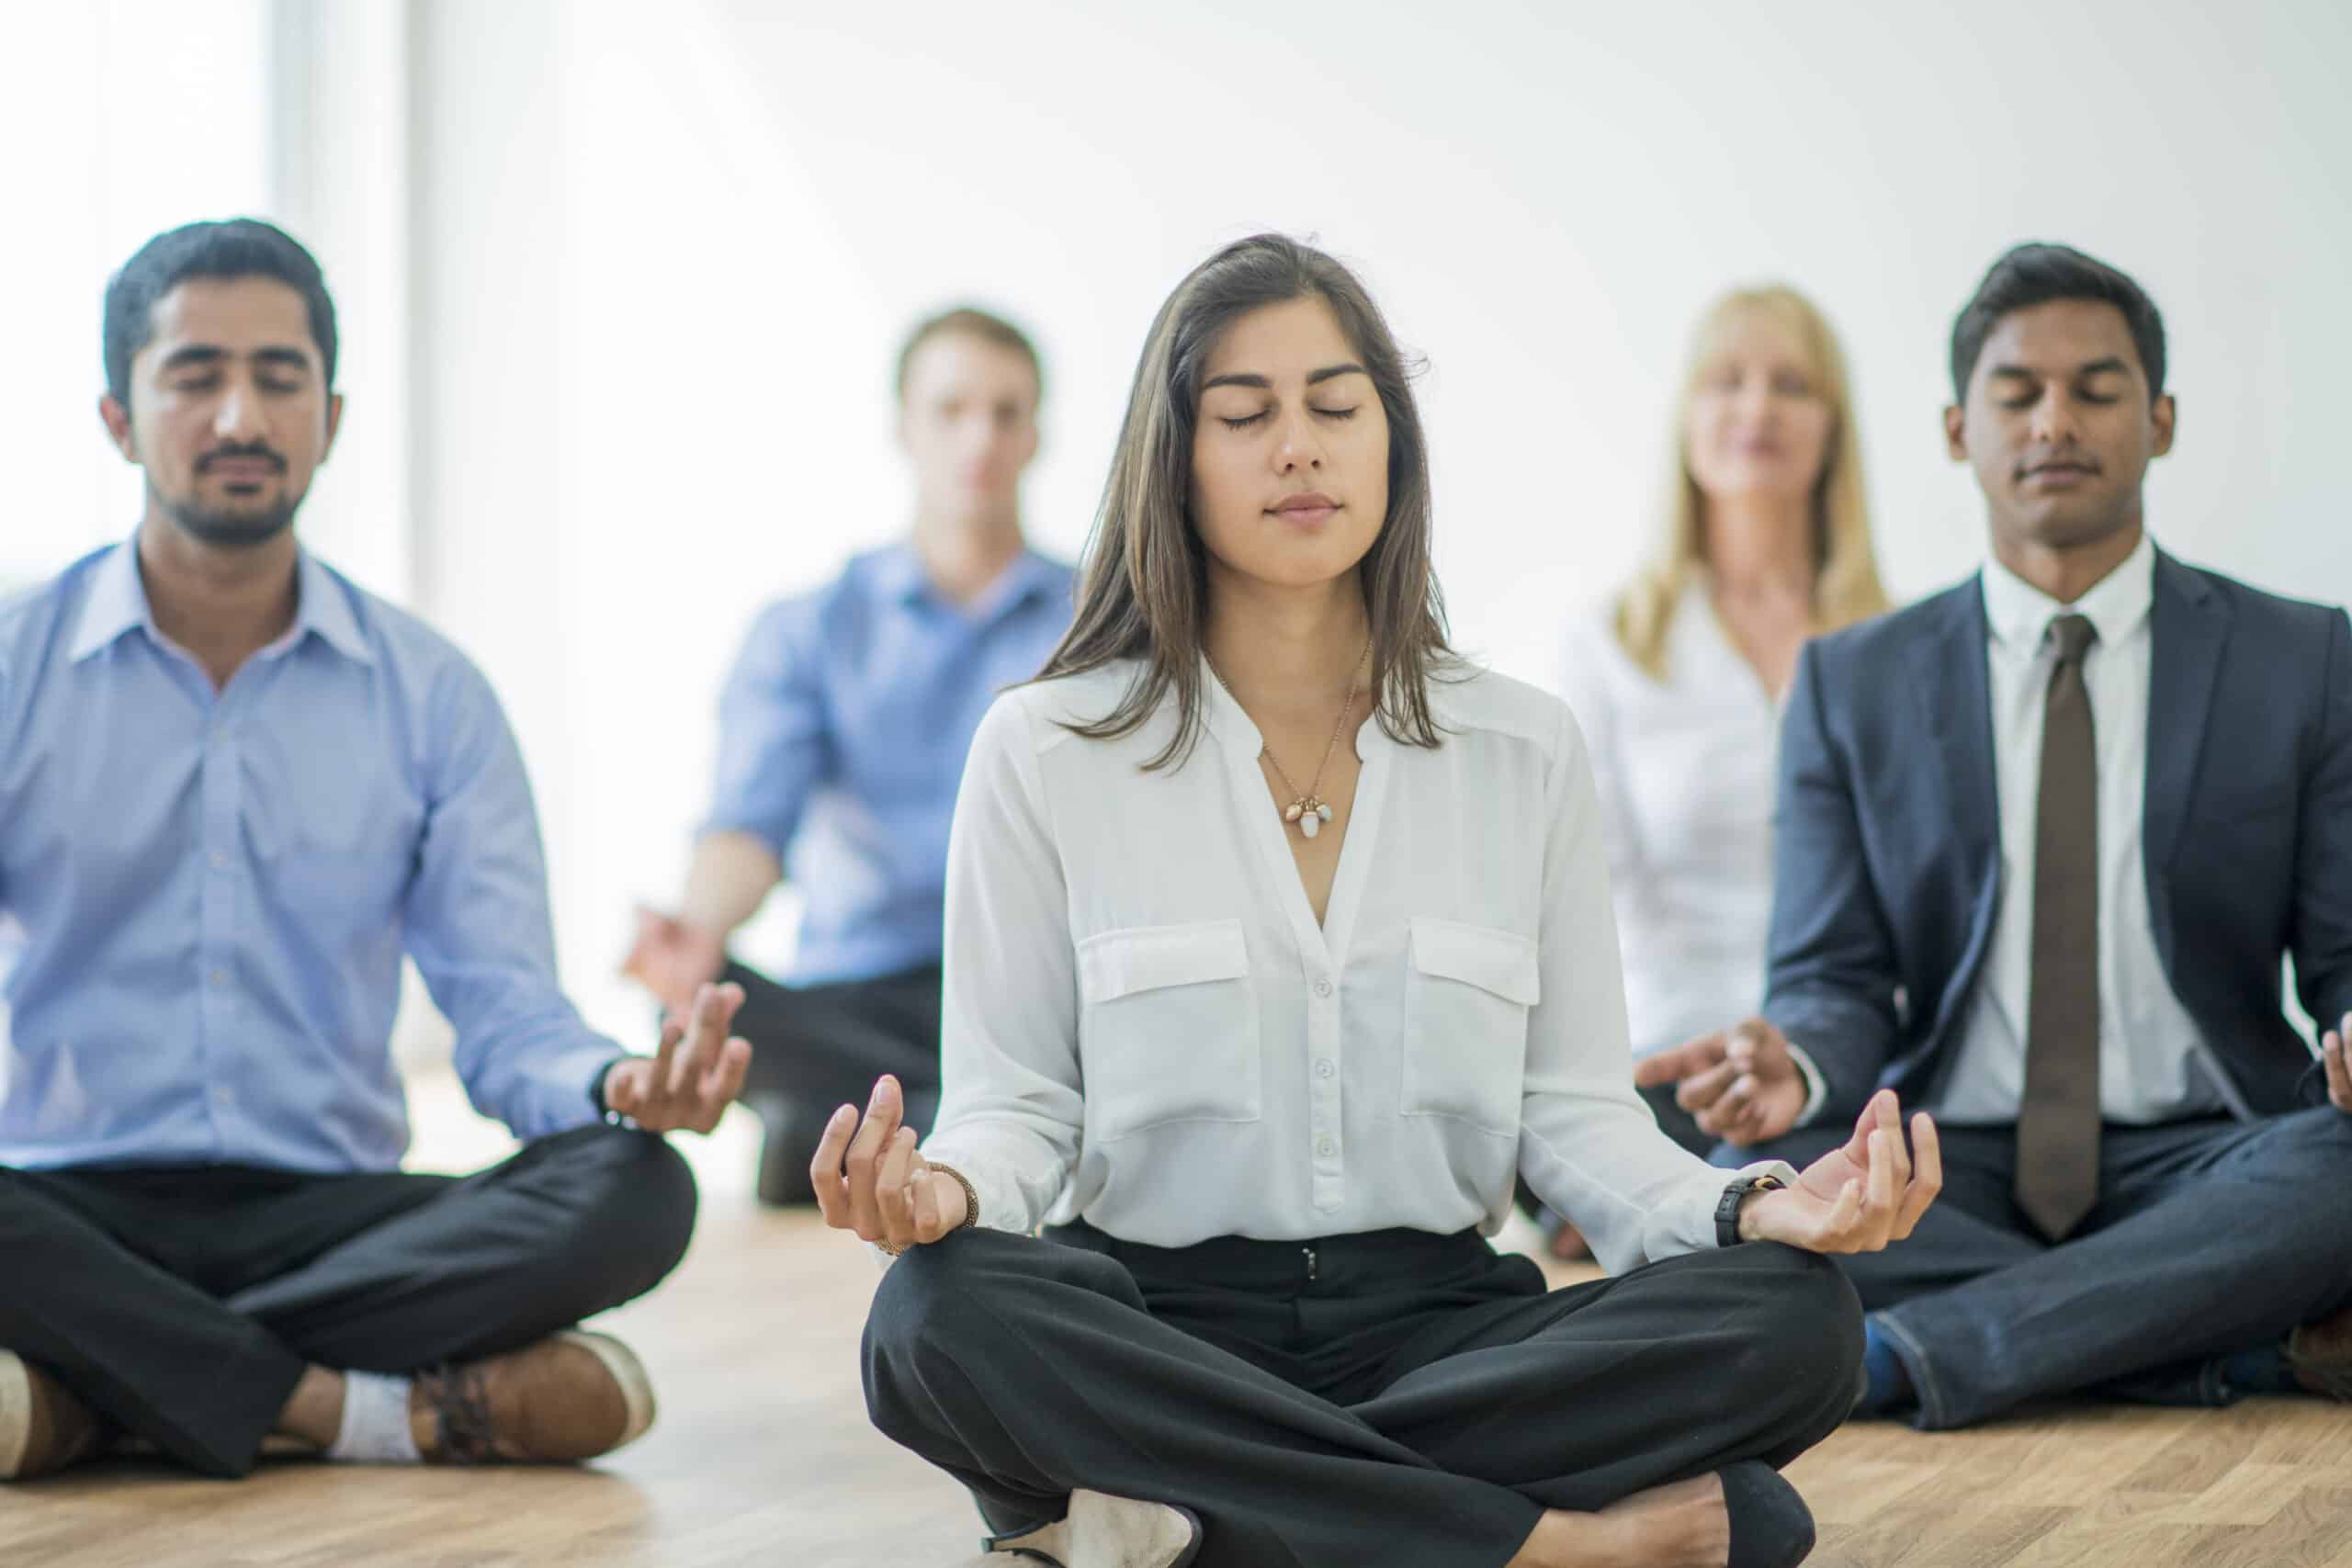 Employee wellbeing and Meditating at the Office